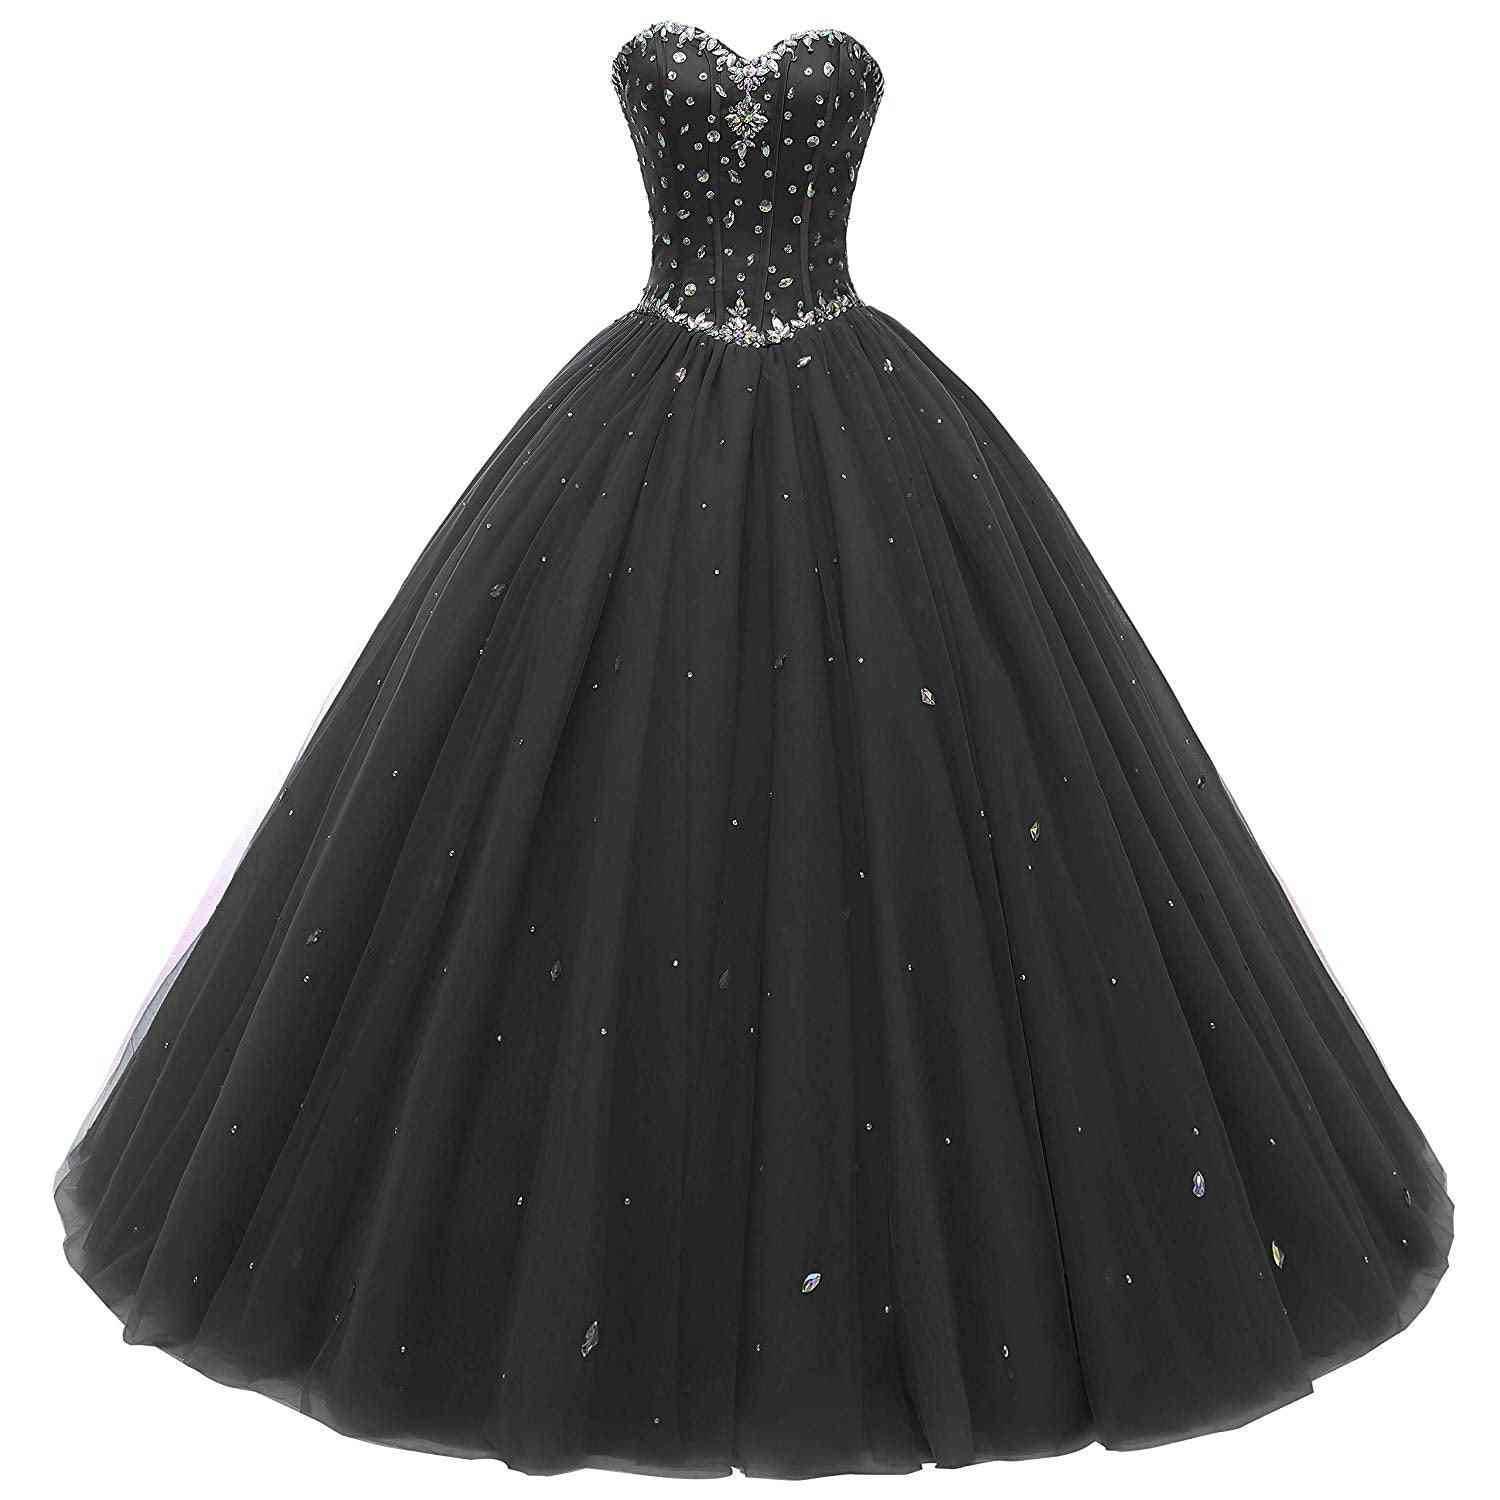 Crystal Beads Debutante Ball Gown Prom Dress